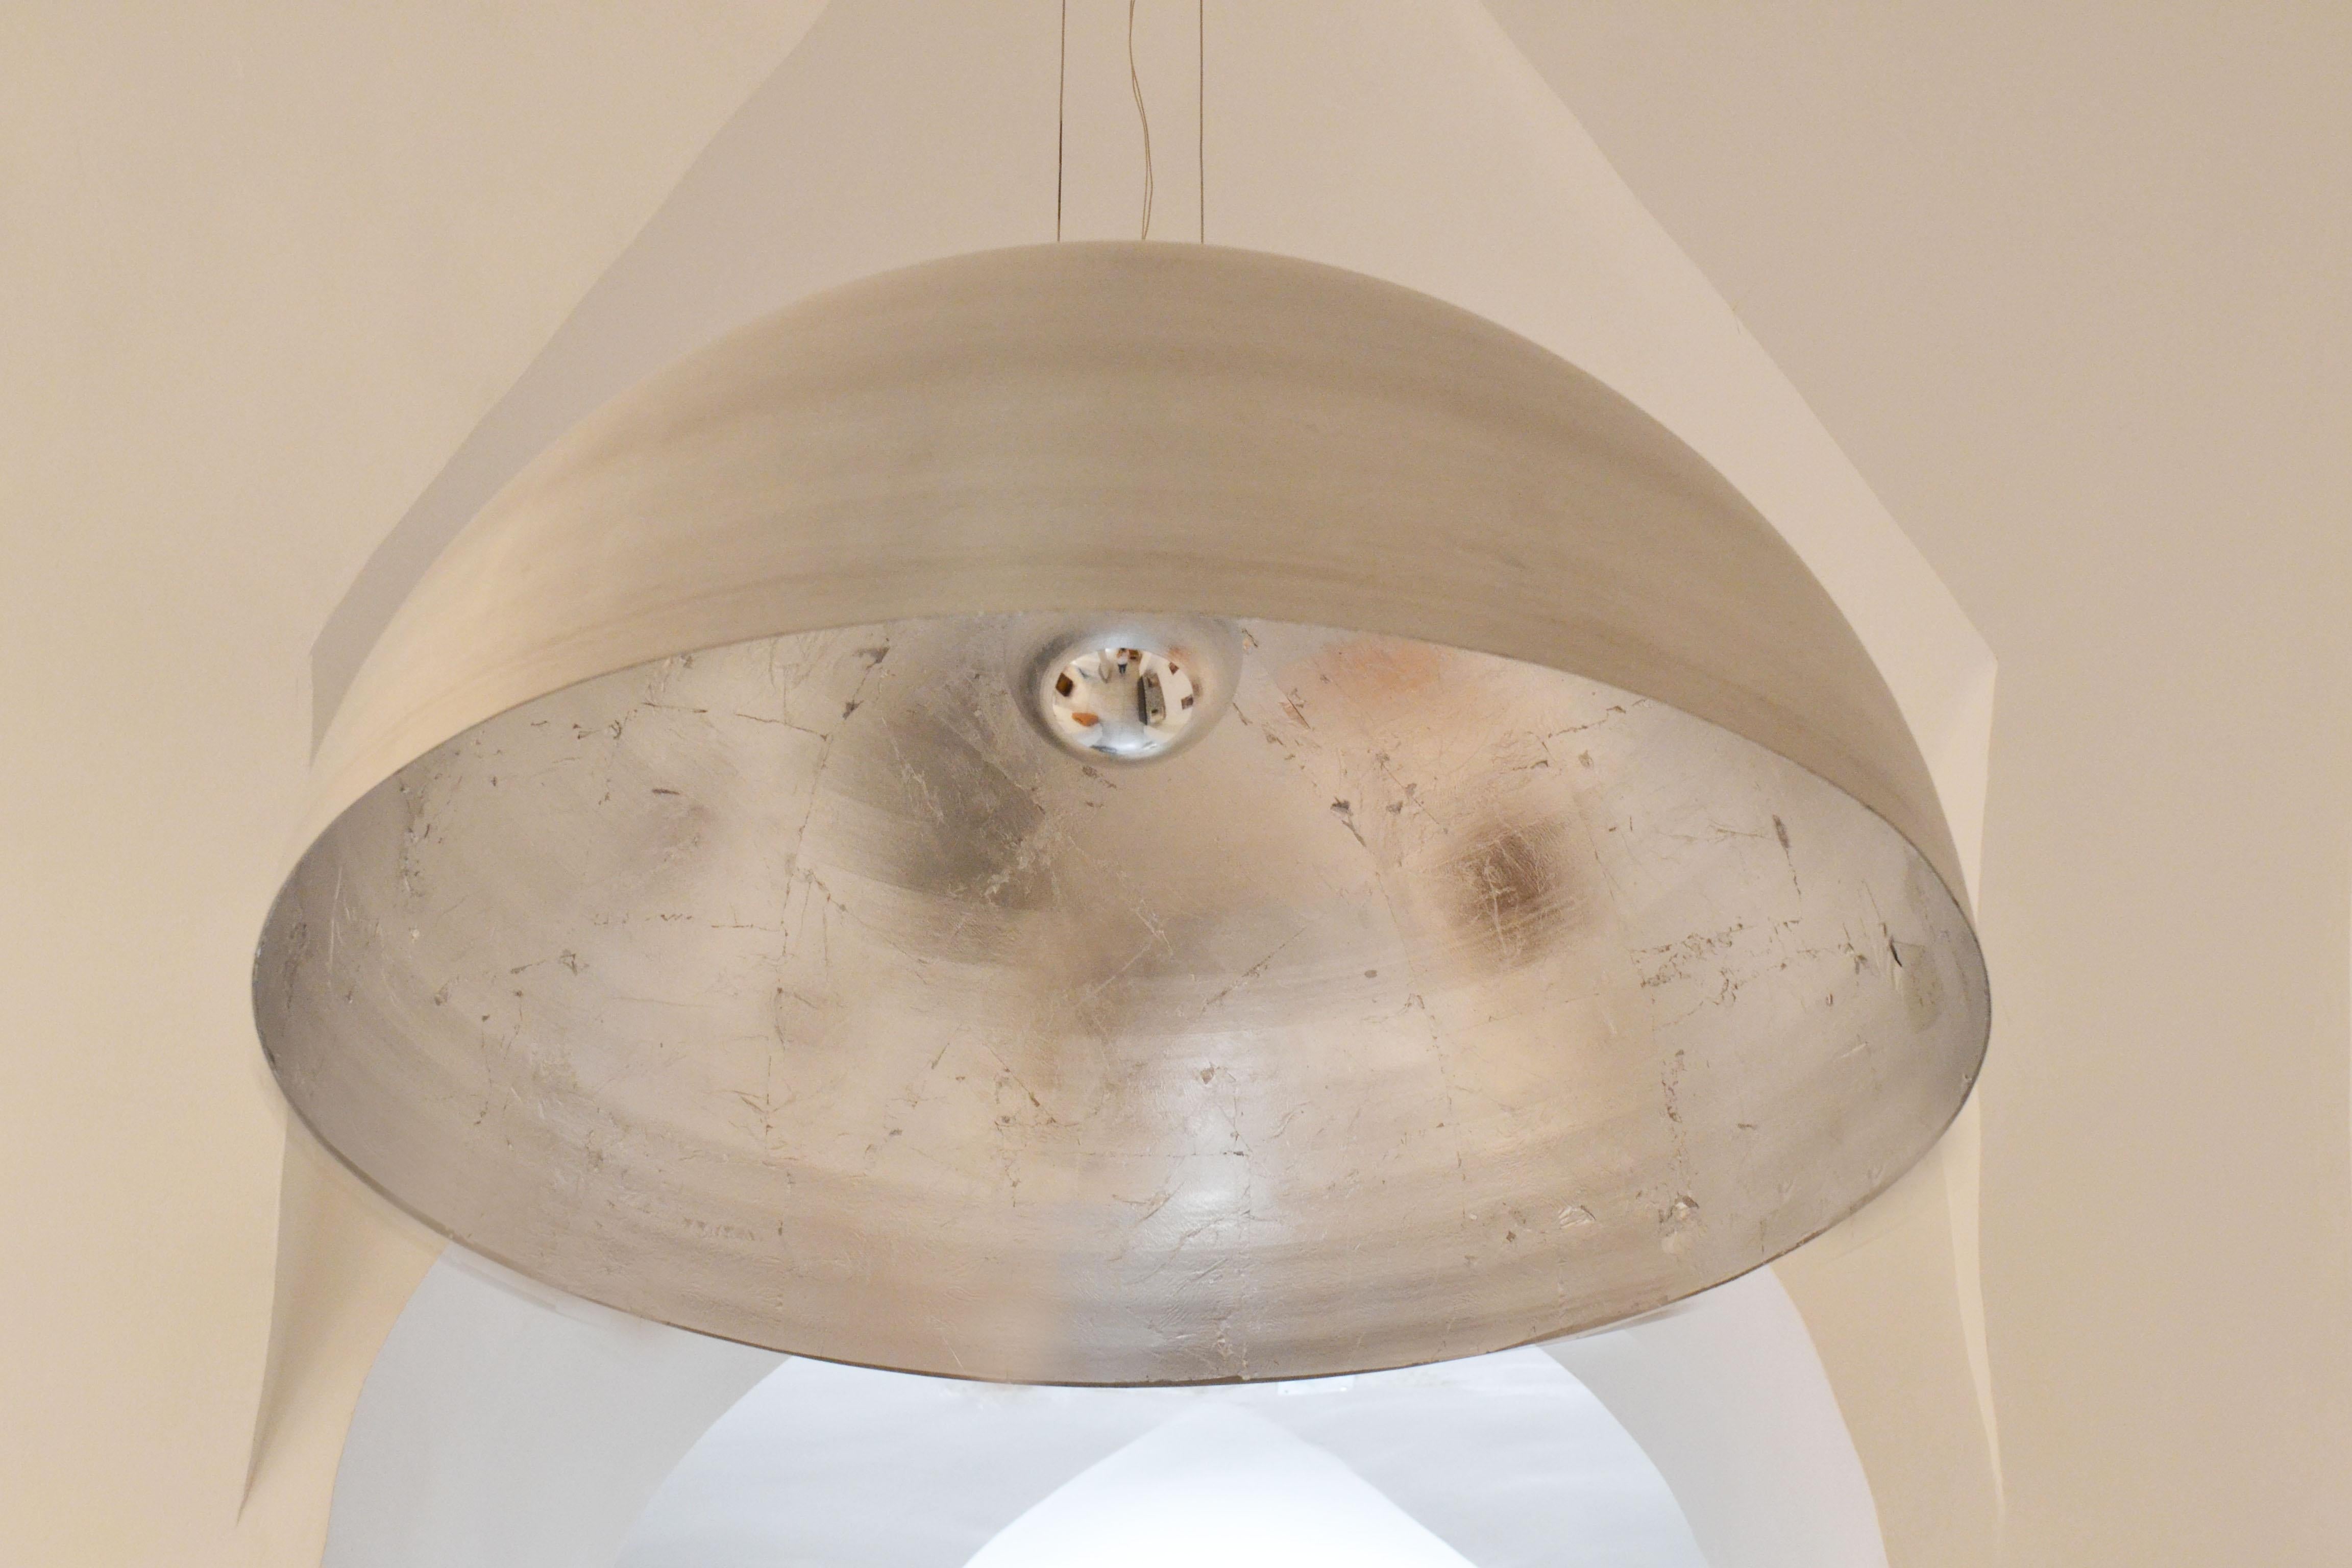 'Lámpara Luna' or 'Moon Lamp' is a large circular ceiling pendant or chandelier by the Spanish Design Studio Element&Co.

Its interior is lined with hand laid silver leaf which reflects the light and diffuses a mysterious glow.

Its body is